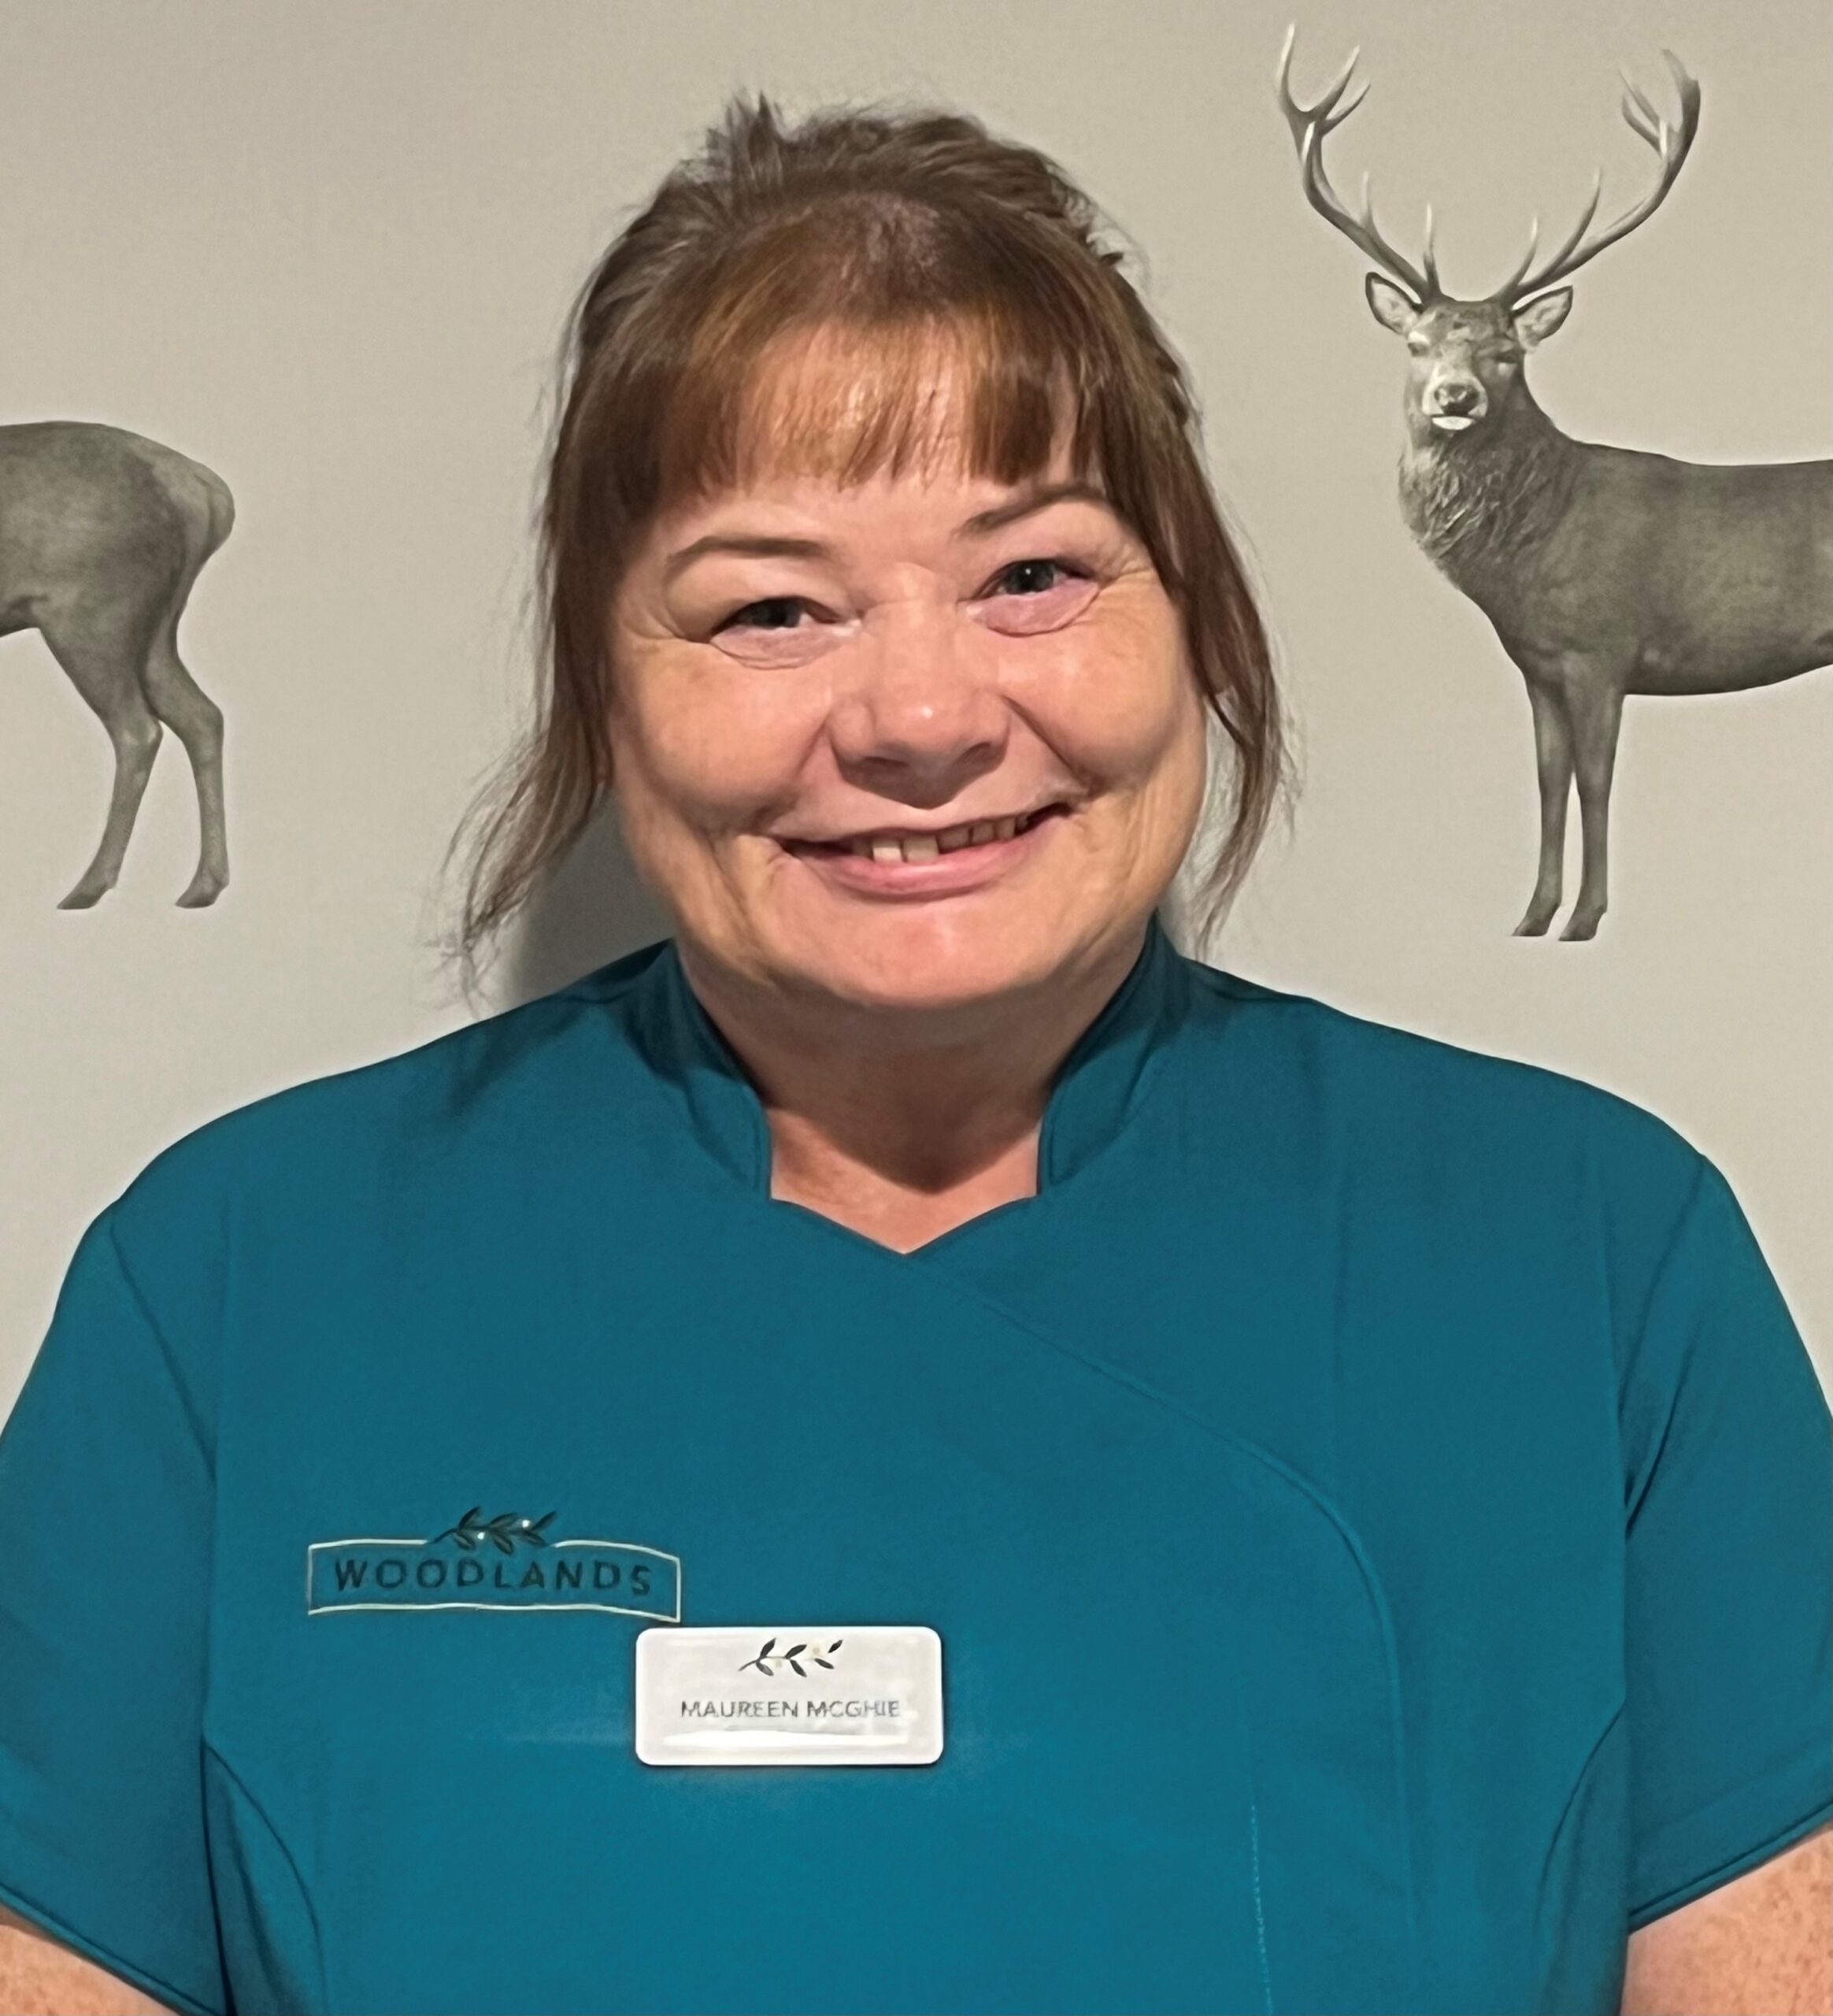 Maureen McGhie, Care Assistant at Woodlands